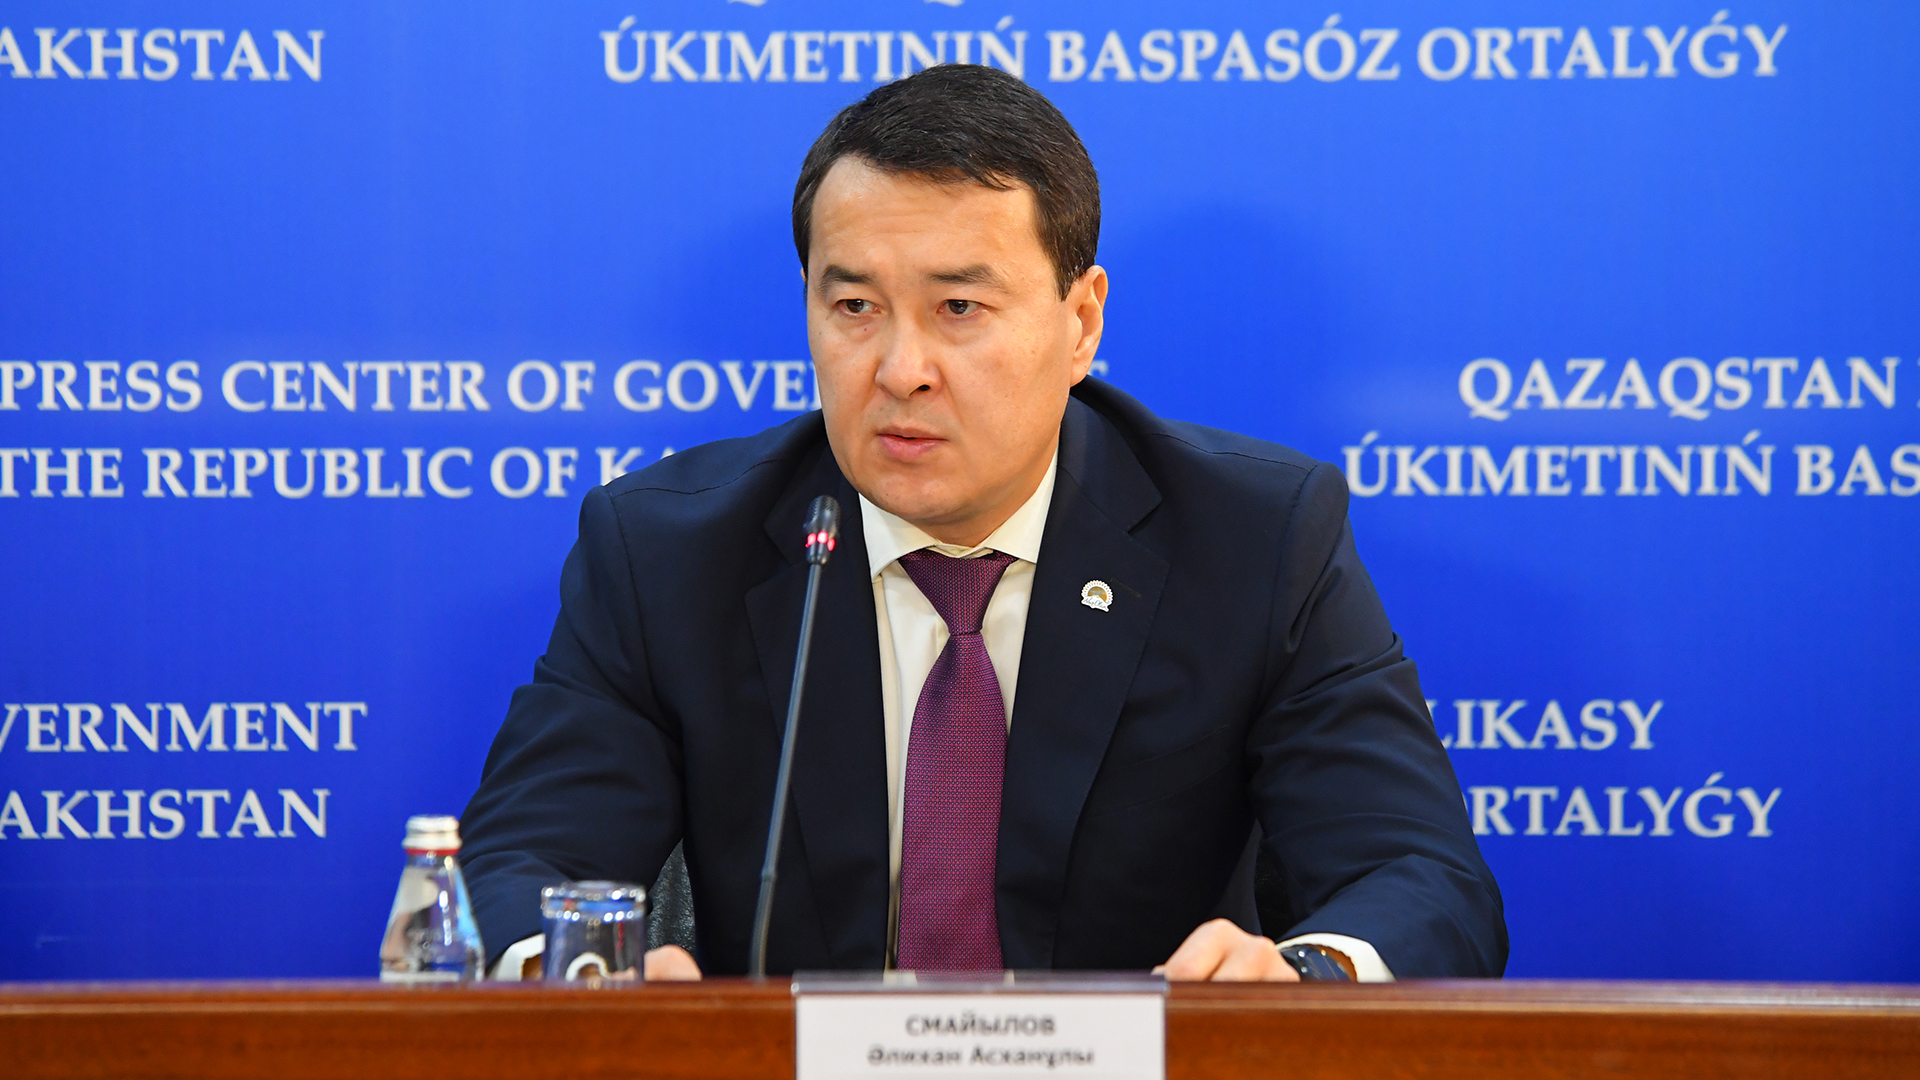 Kazakh Finance Minister on special procedure for budgeting during emergency